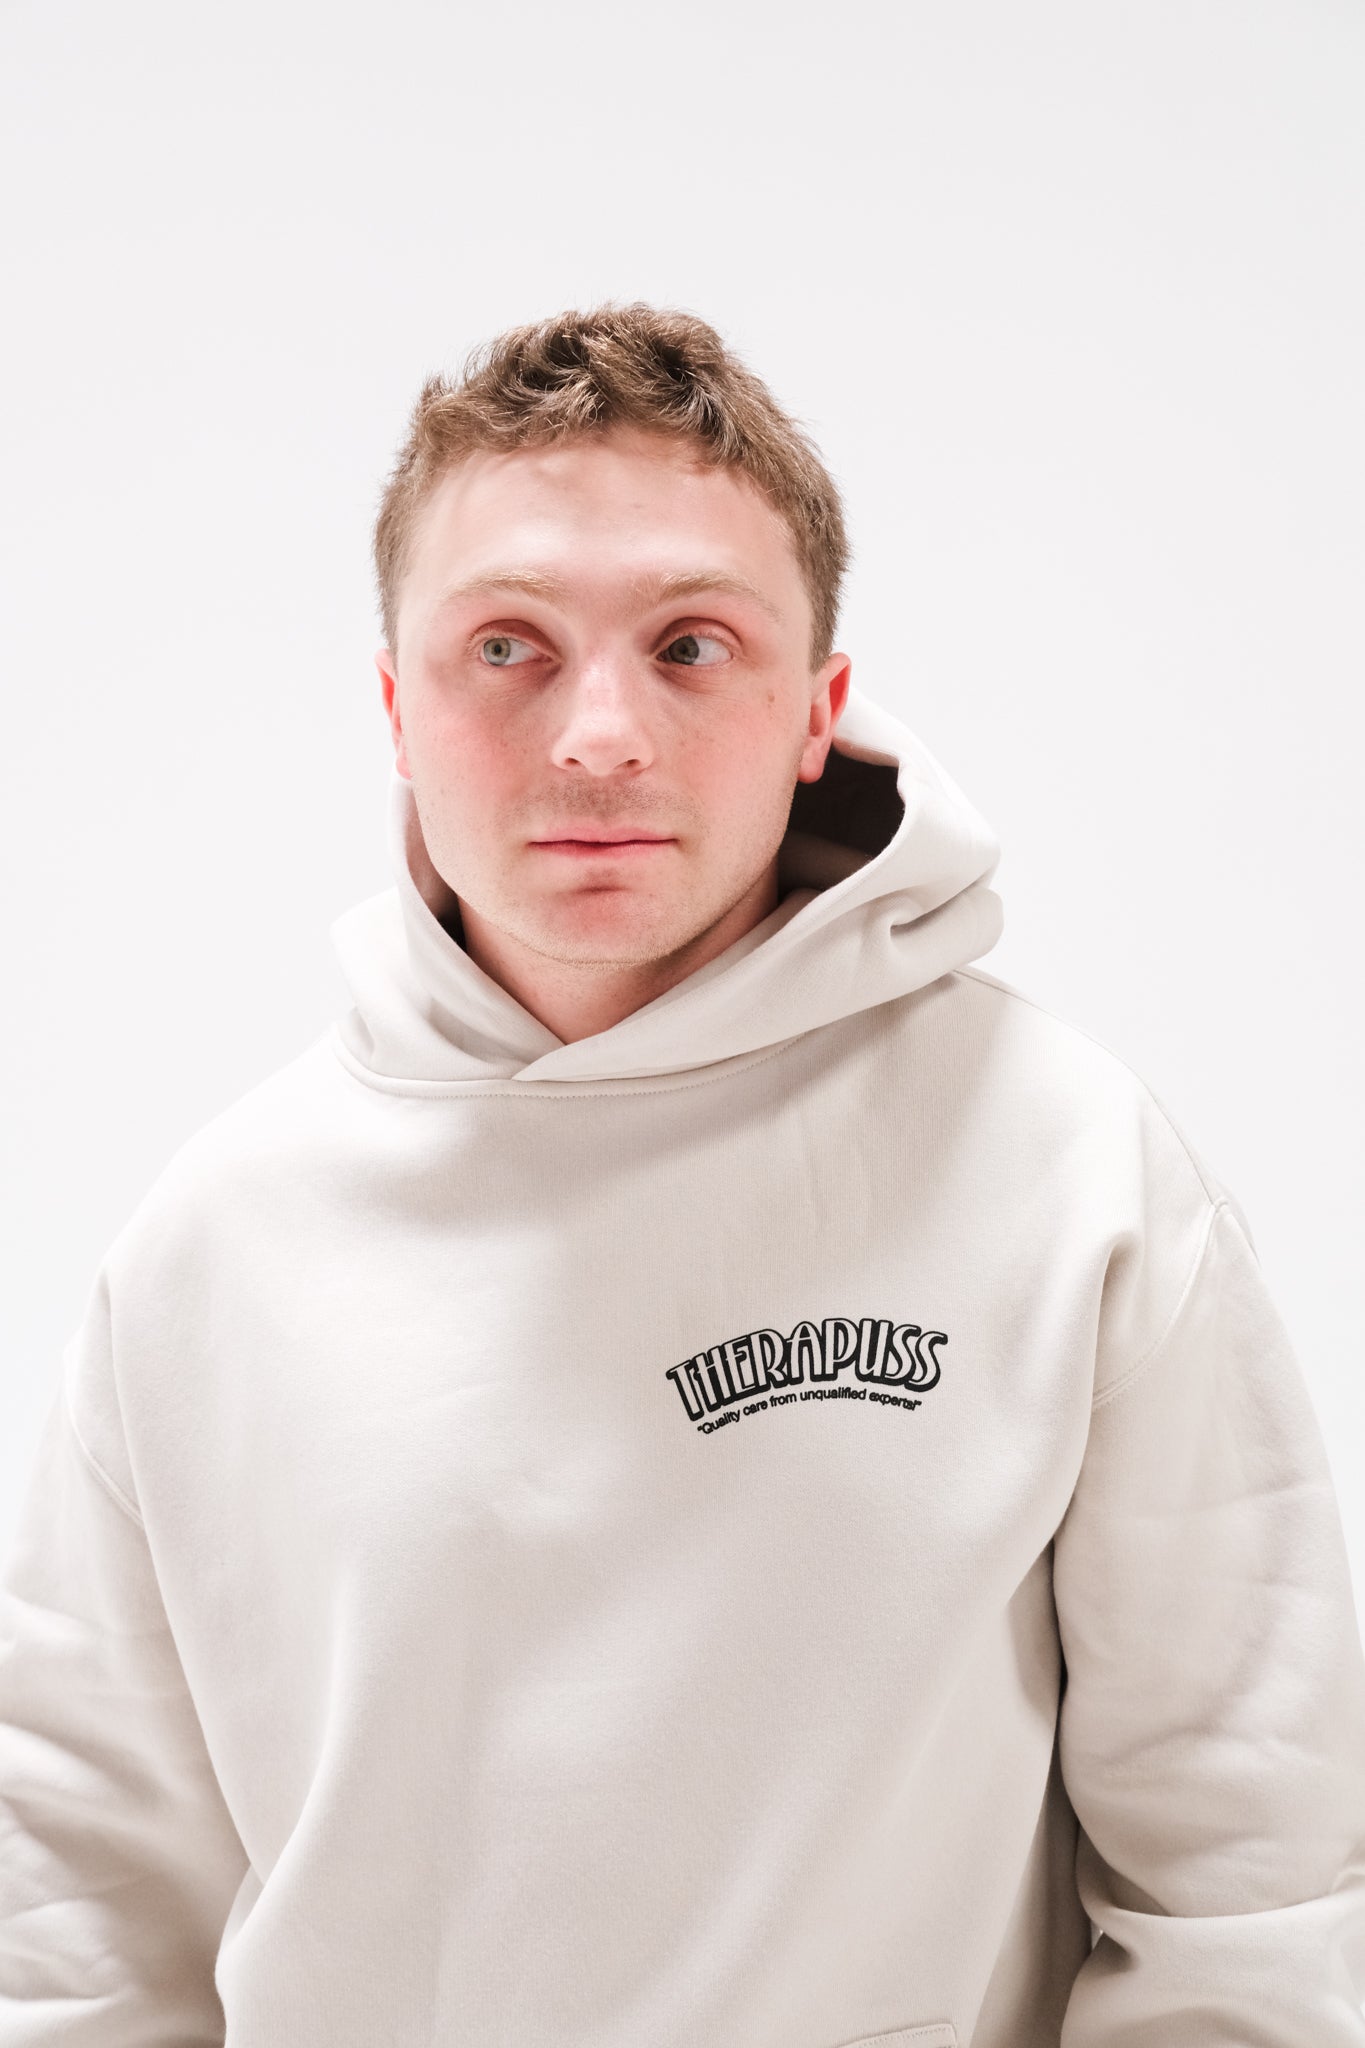 Therapuss Hoodie